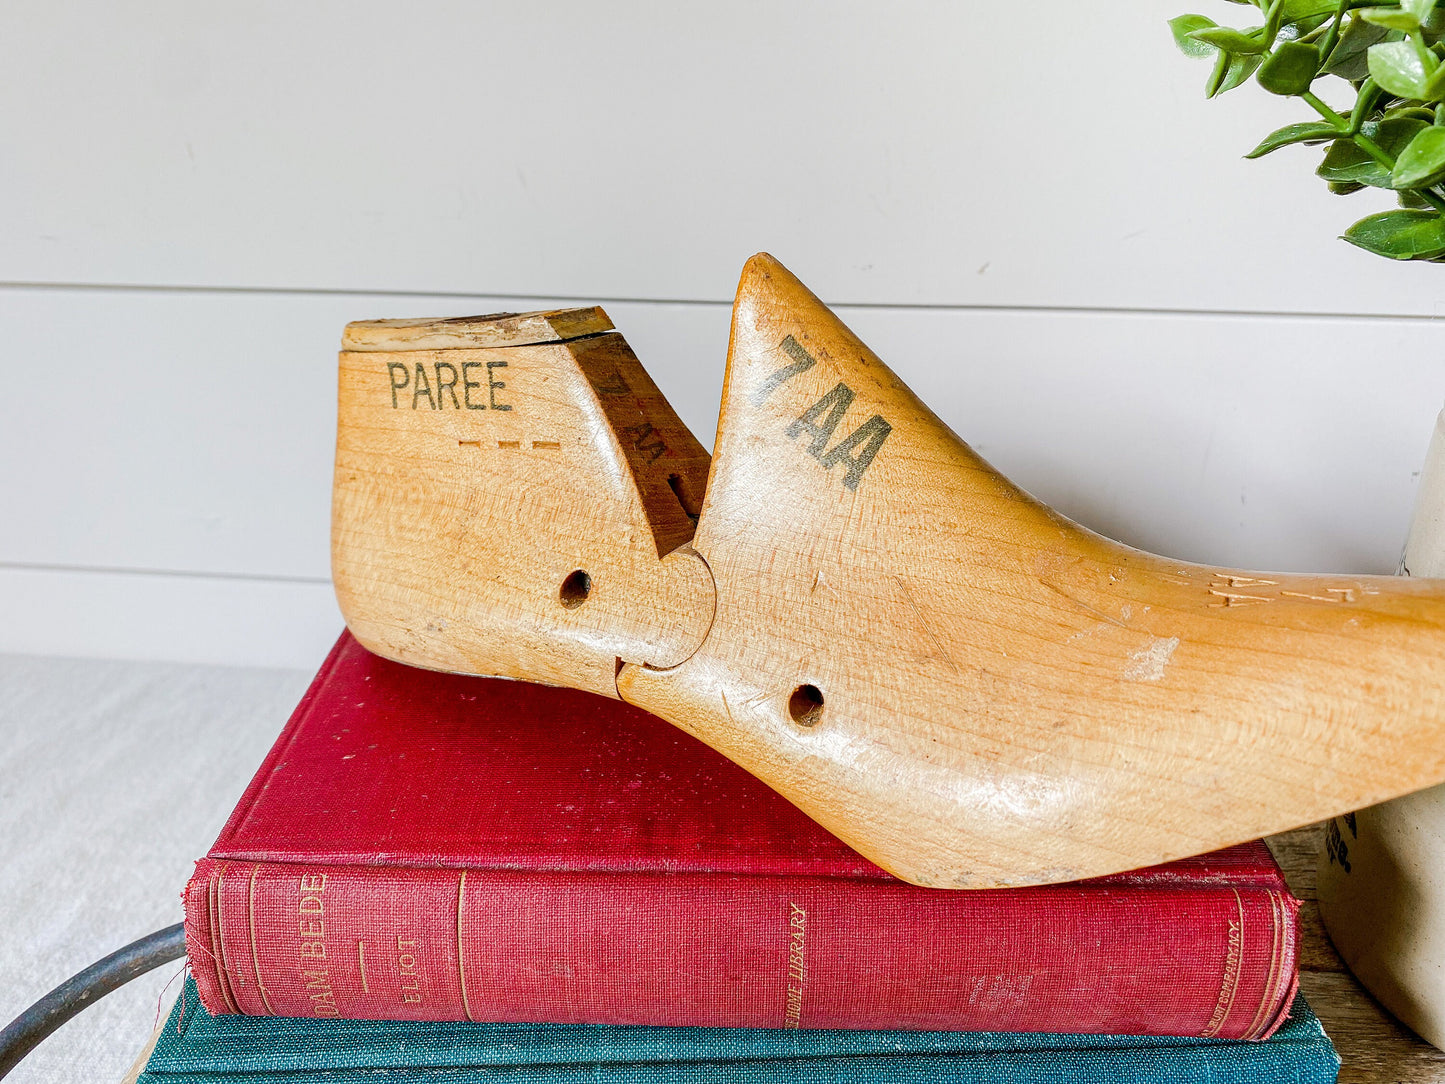 Vintage Pair of 1960s Wooden Shoe Molds - "Paree" 7AA